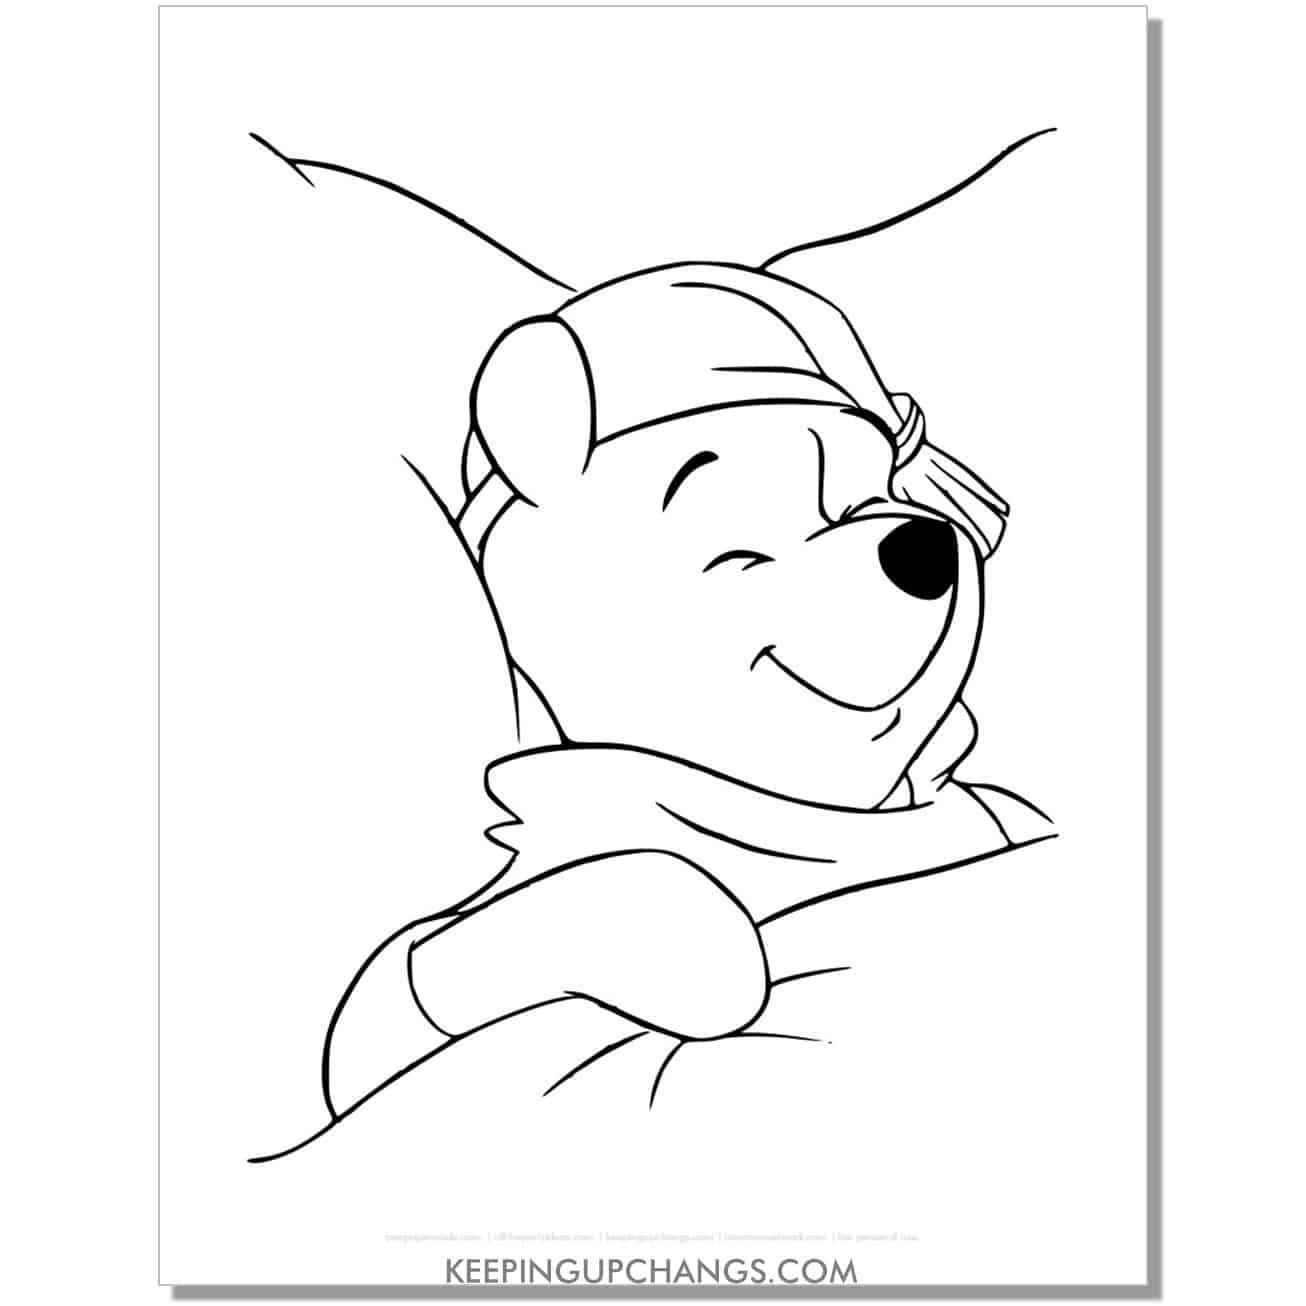 winnie the pooh sleeping in bed coloring page, sheet.